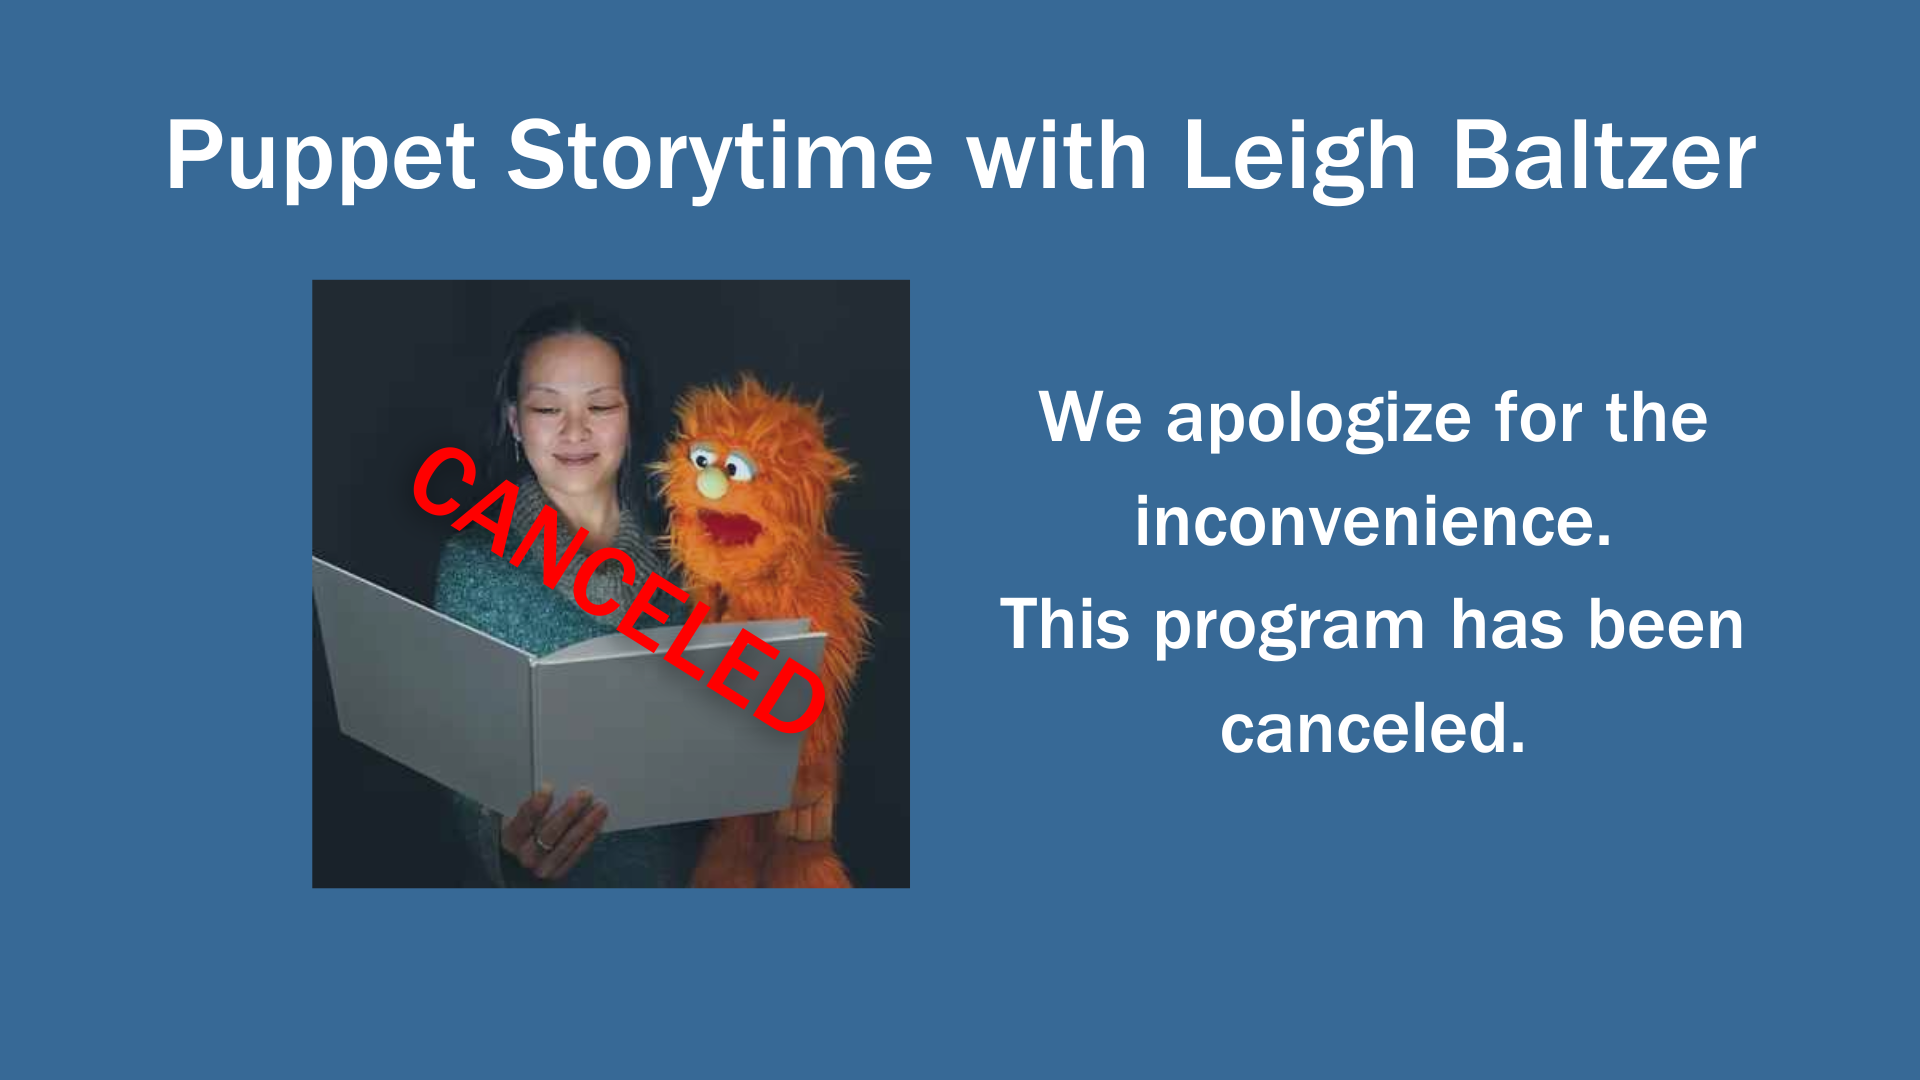 Puppet Storytime Canceled